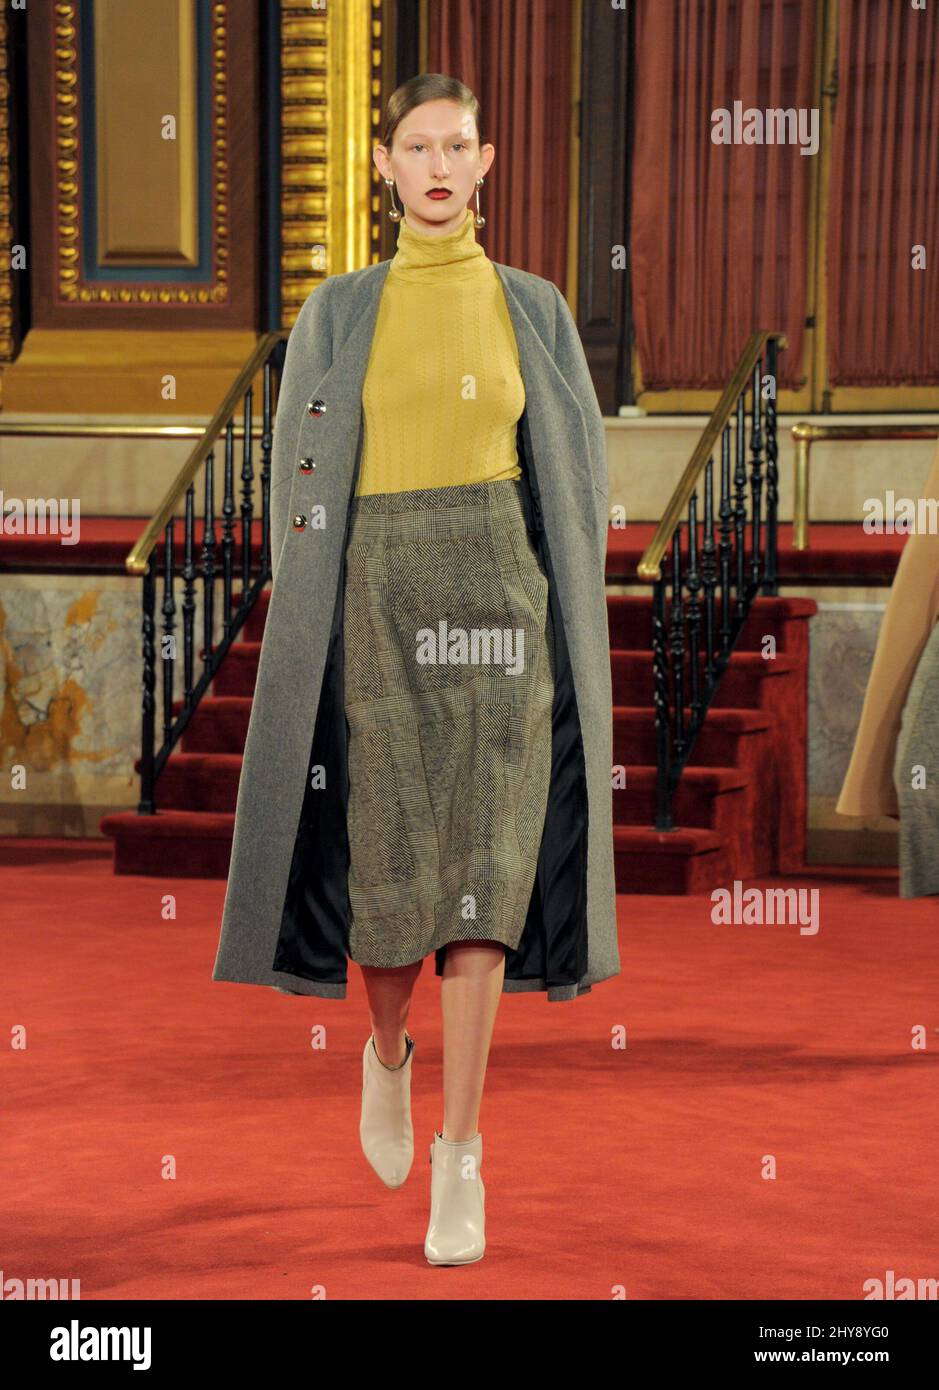 Model attending the Creatures of the Wind Fall 2016 Collection held at the Masonic Lodge in New York. Stock Photo